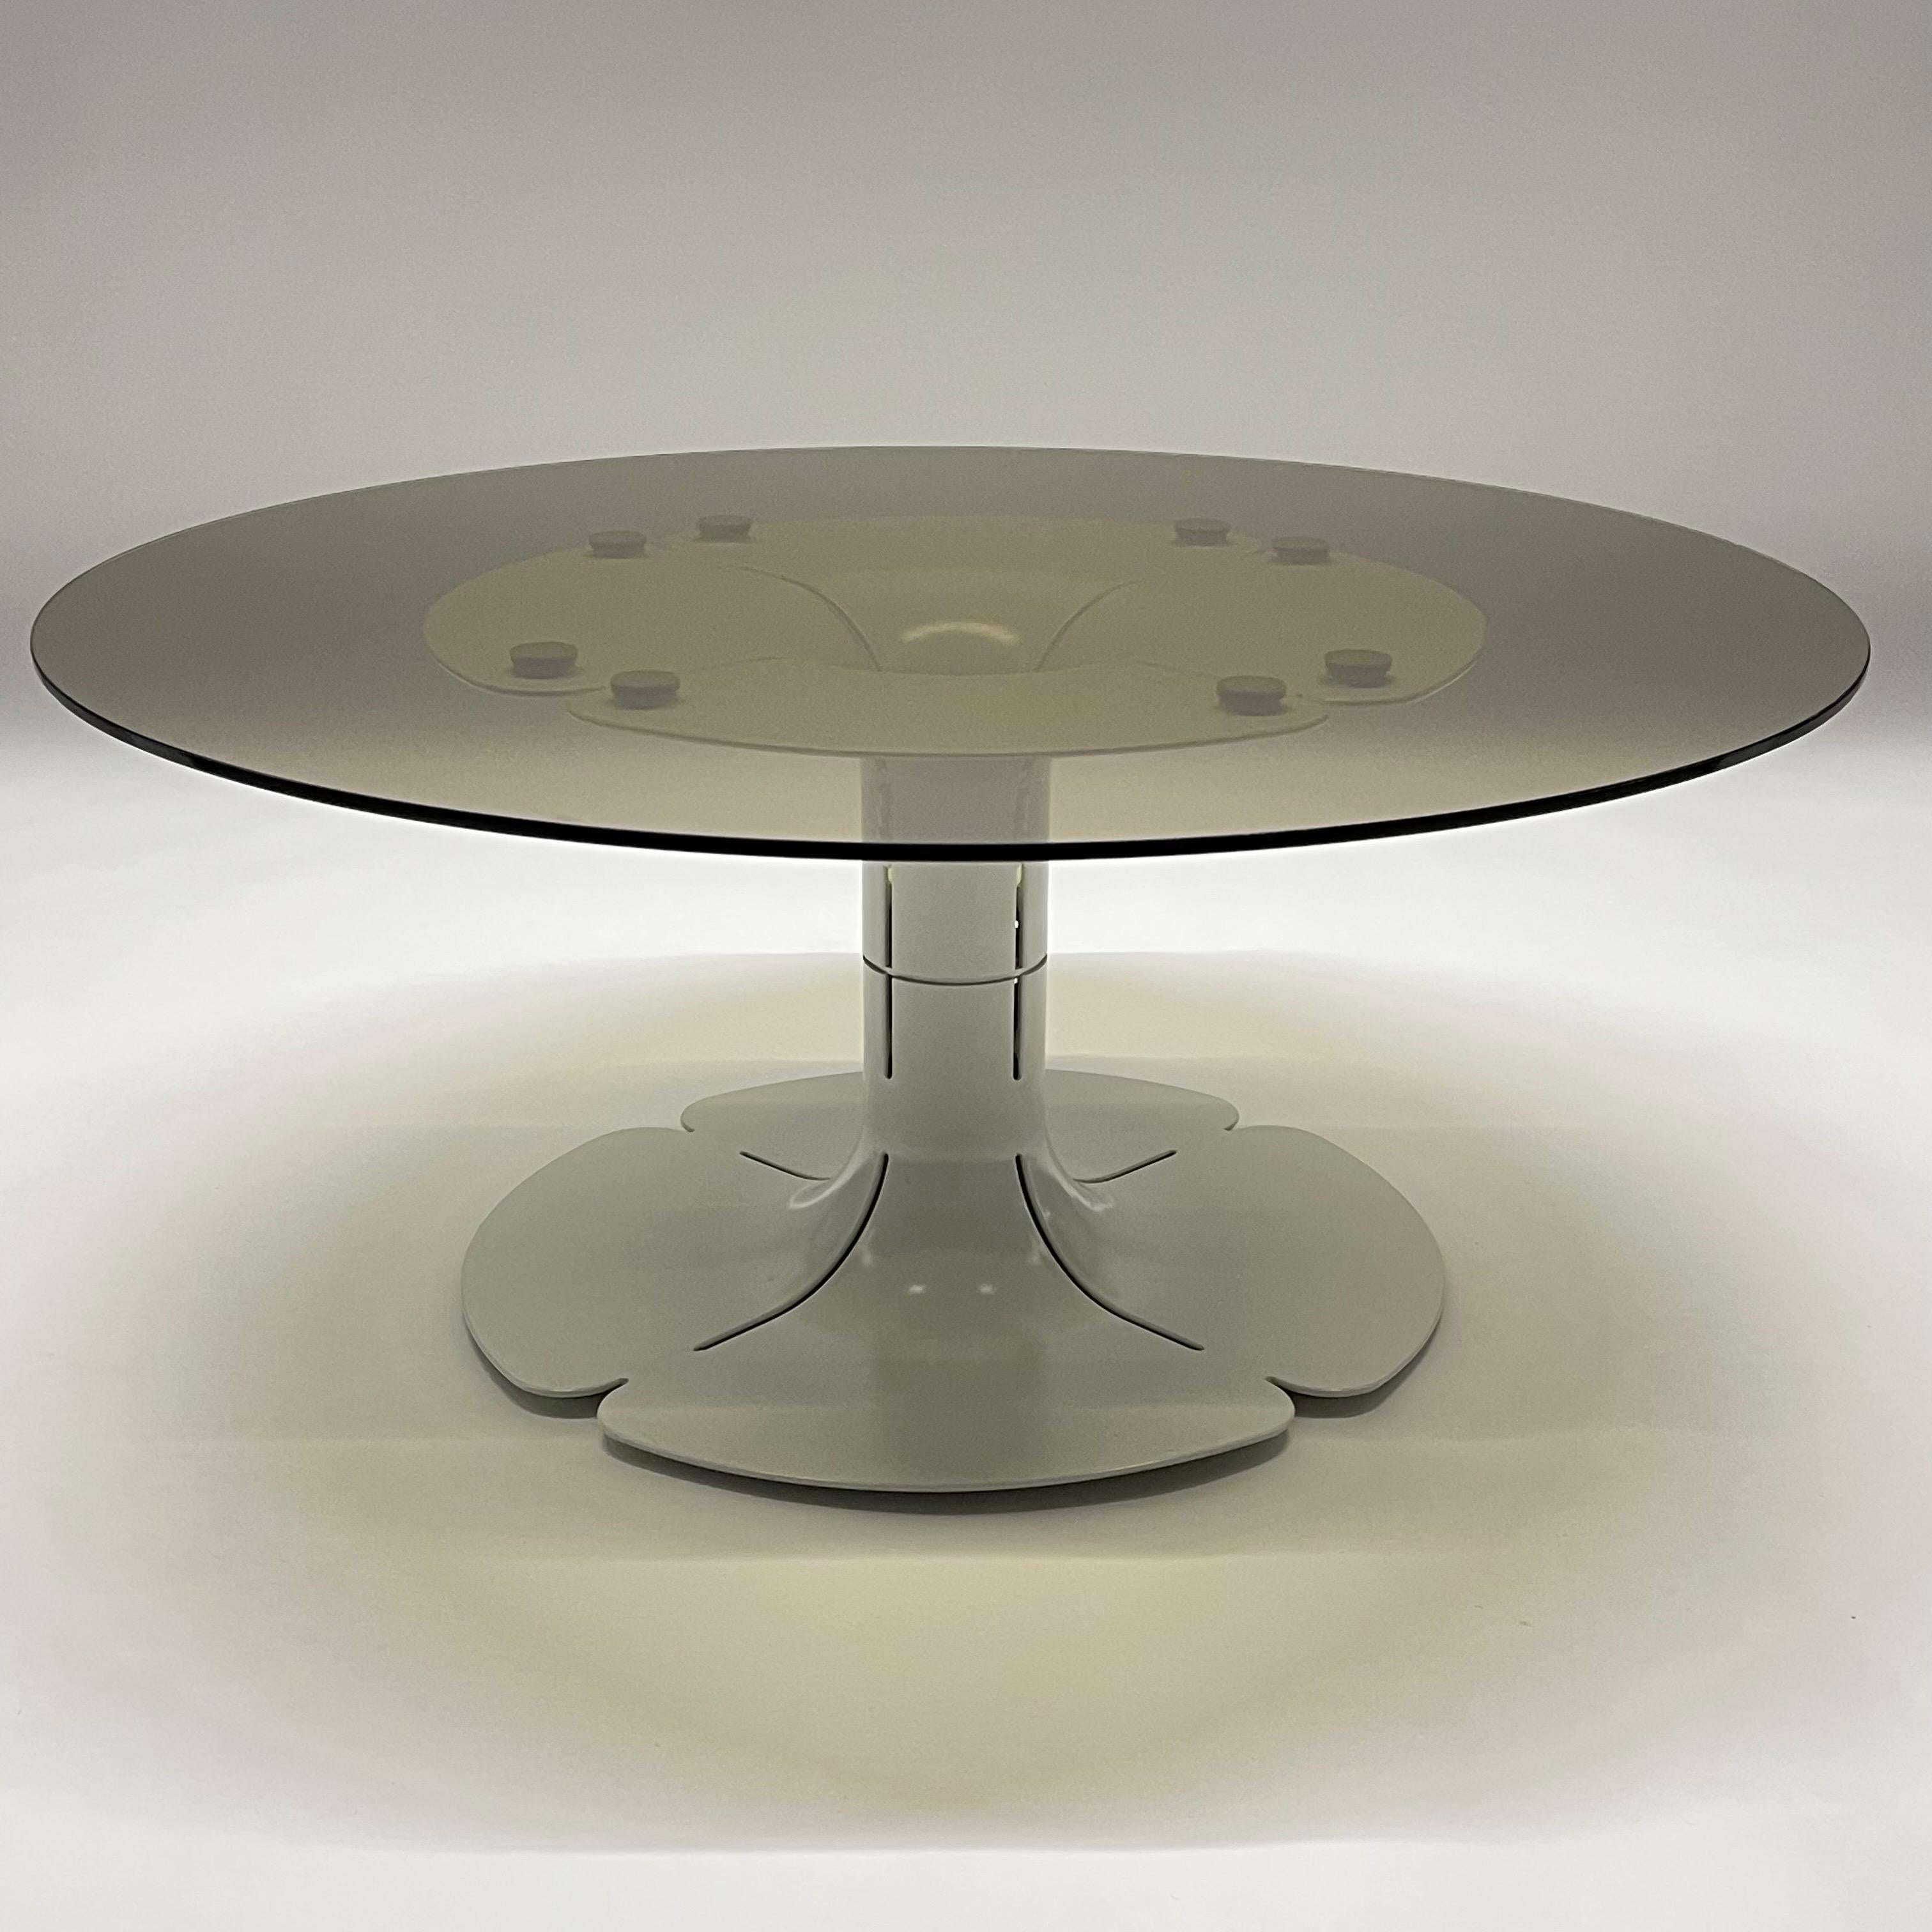 Rare and Important Iconic 20th century design Élysée low table, coffee or cocktail table. This piece is an edition of the design by Pierre Paulin for the Private Living Room of President Georges Pompidou and his wife Claude at the Palais de L'Élysée